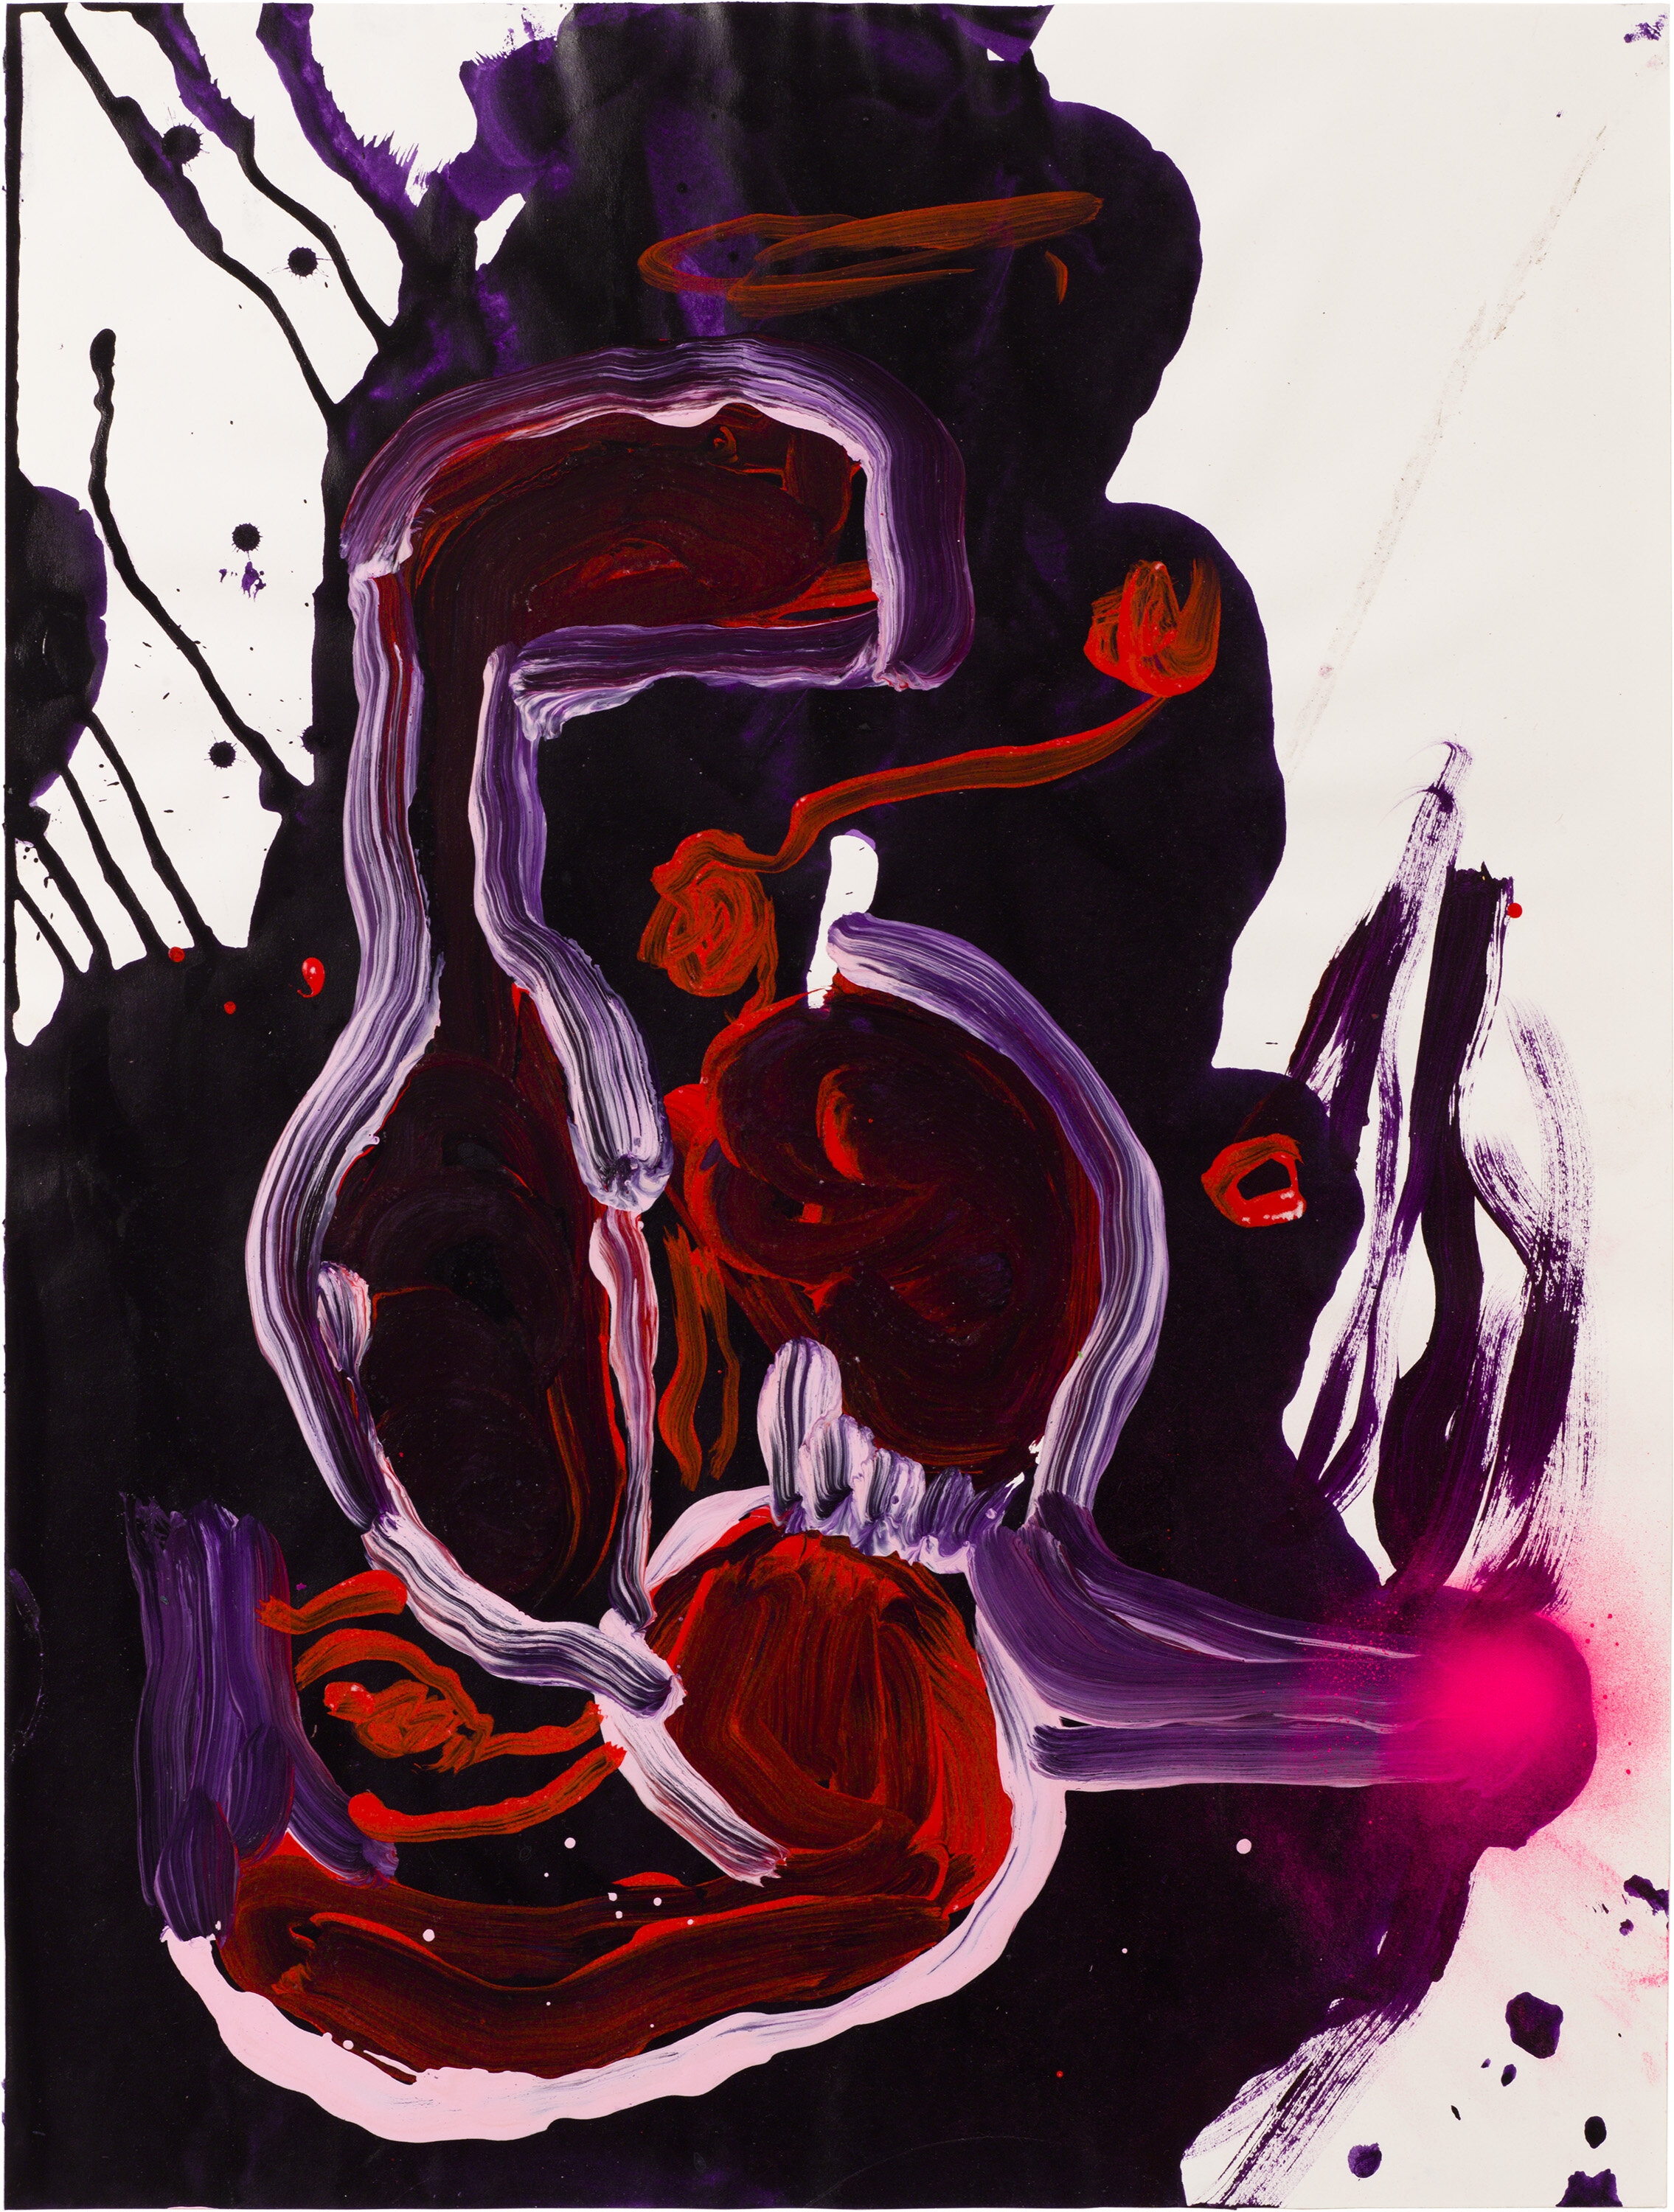  Drew Beattie and Ben Shepard   DBBS-DRW-2015-592   2015  acrylic and spray paint on paper  24 x 18 inches 